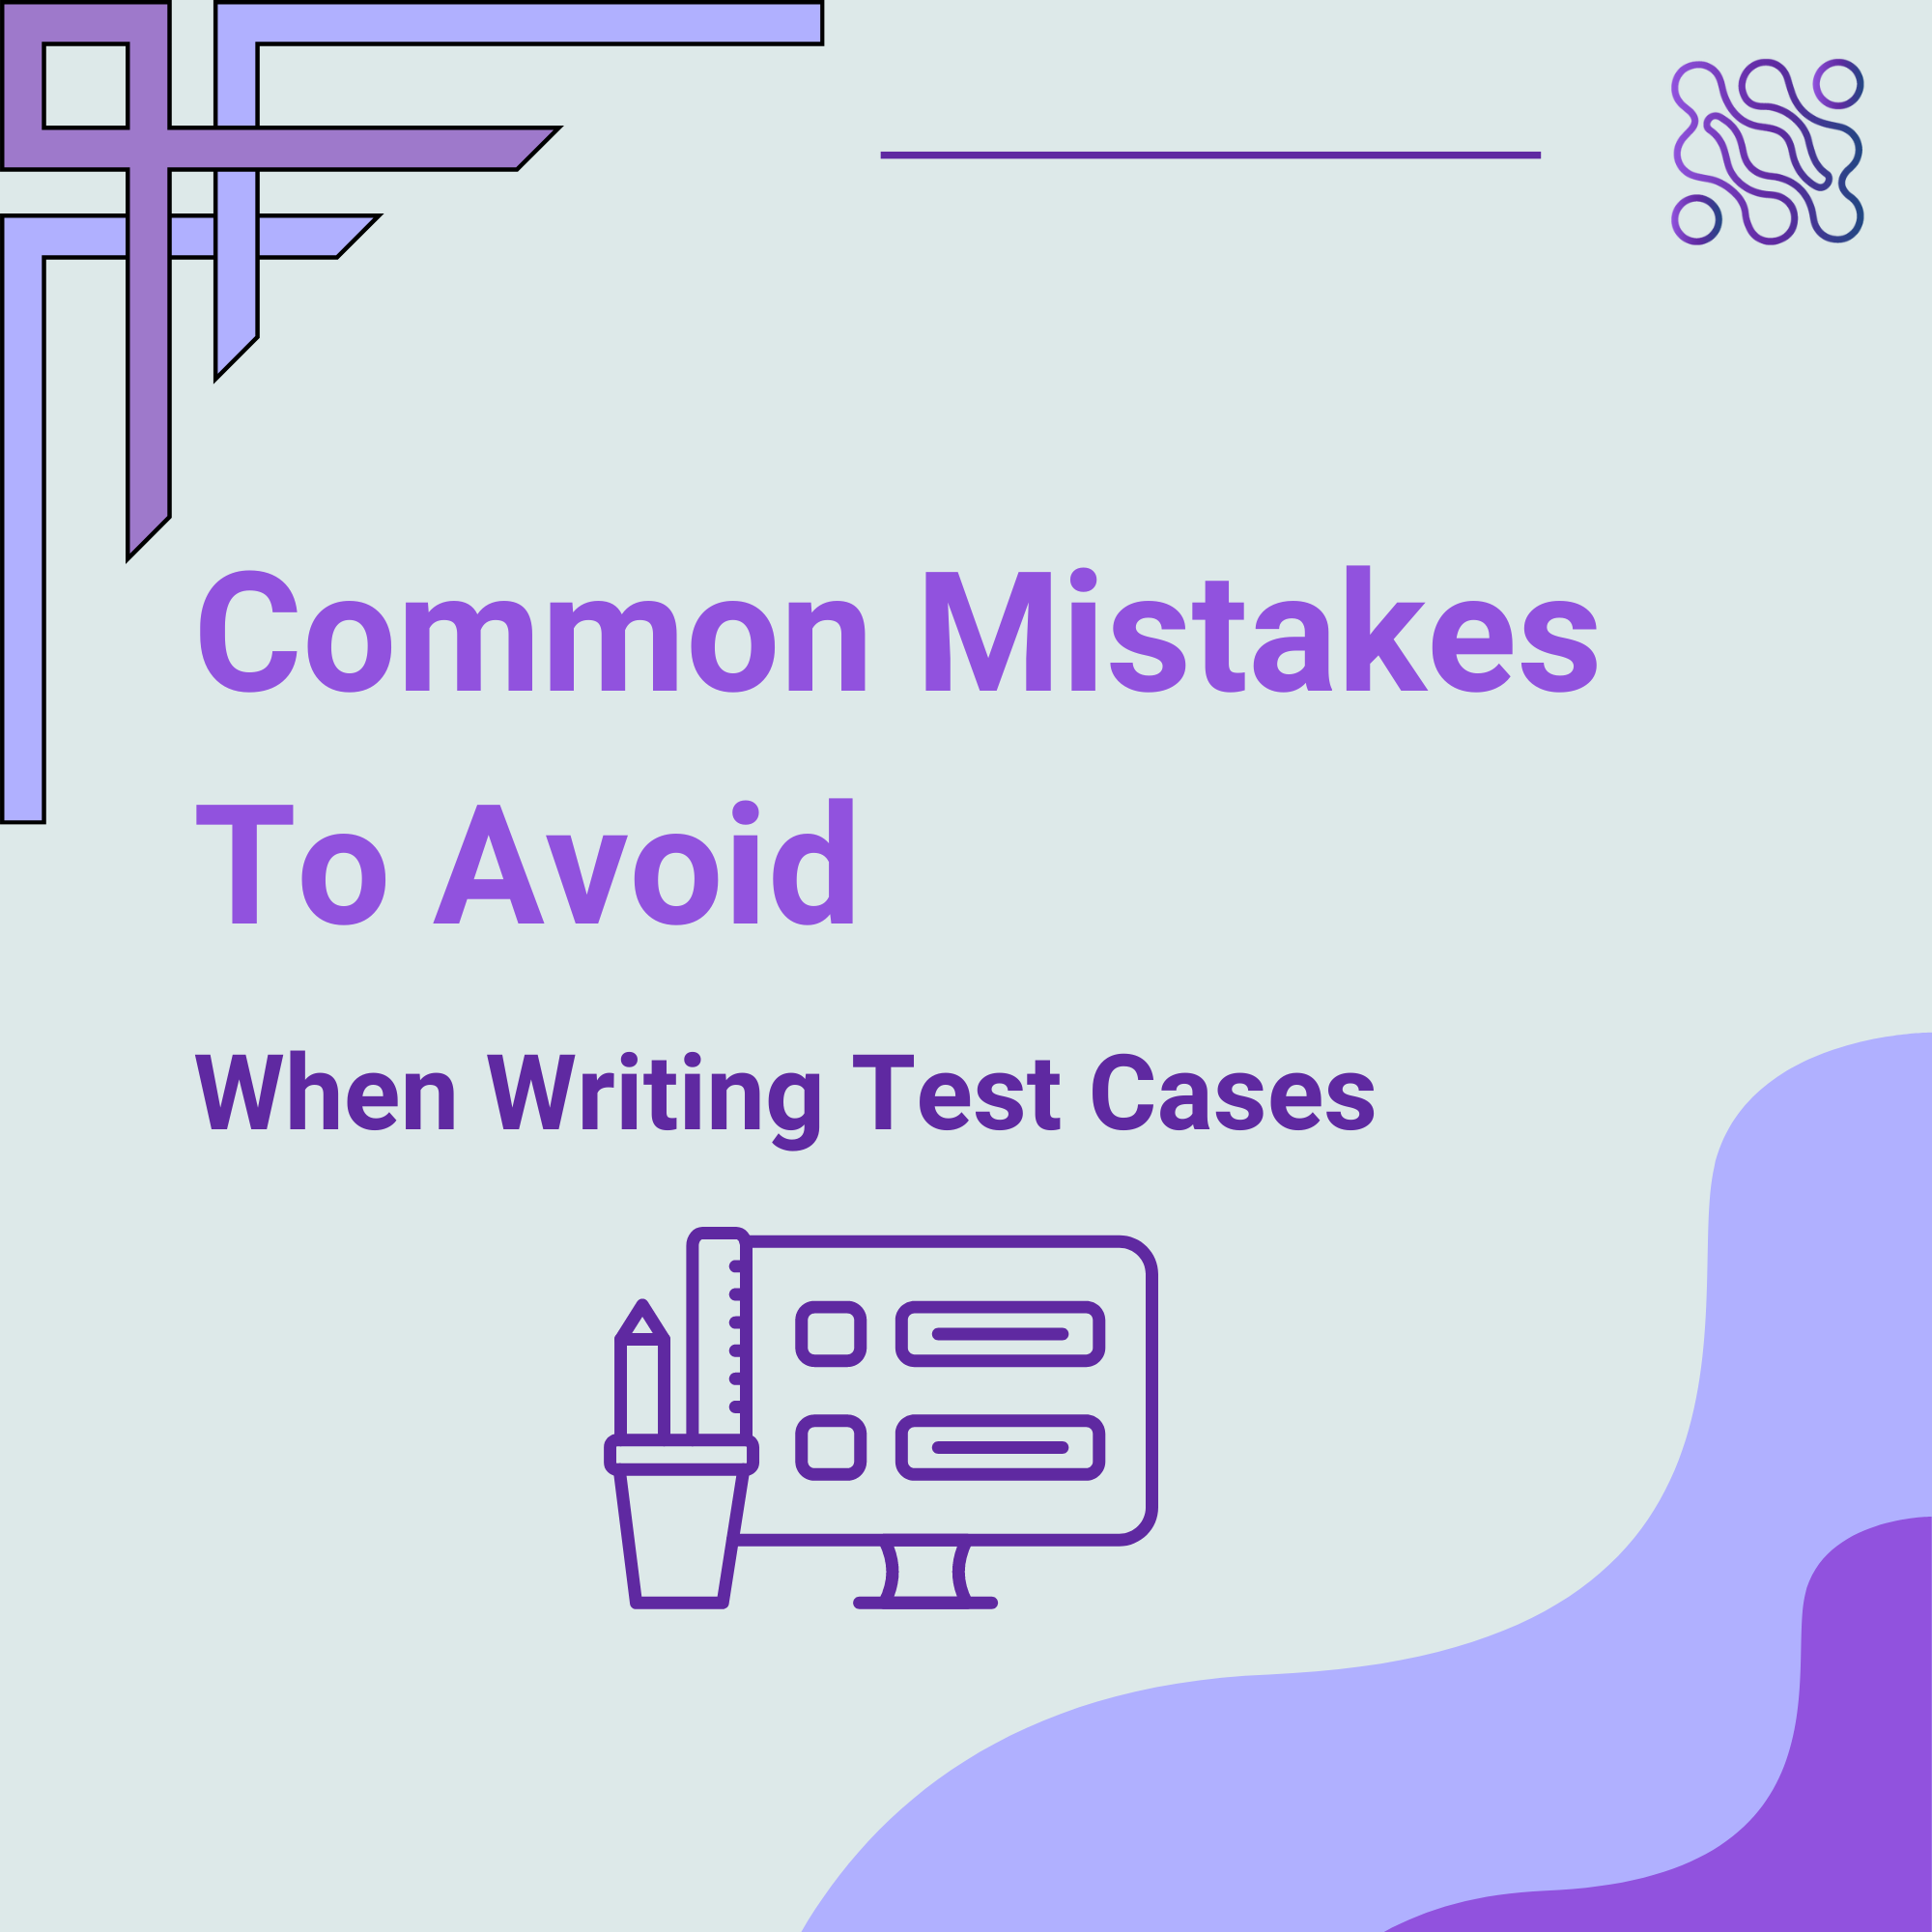 Common Mistakes to Avoid When Writing Test Cases